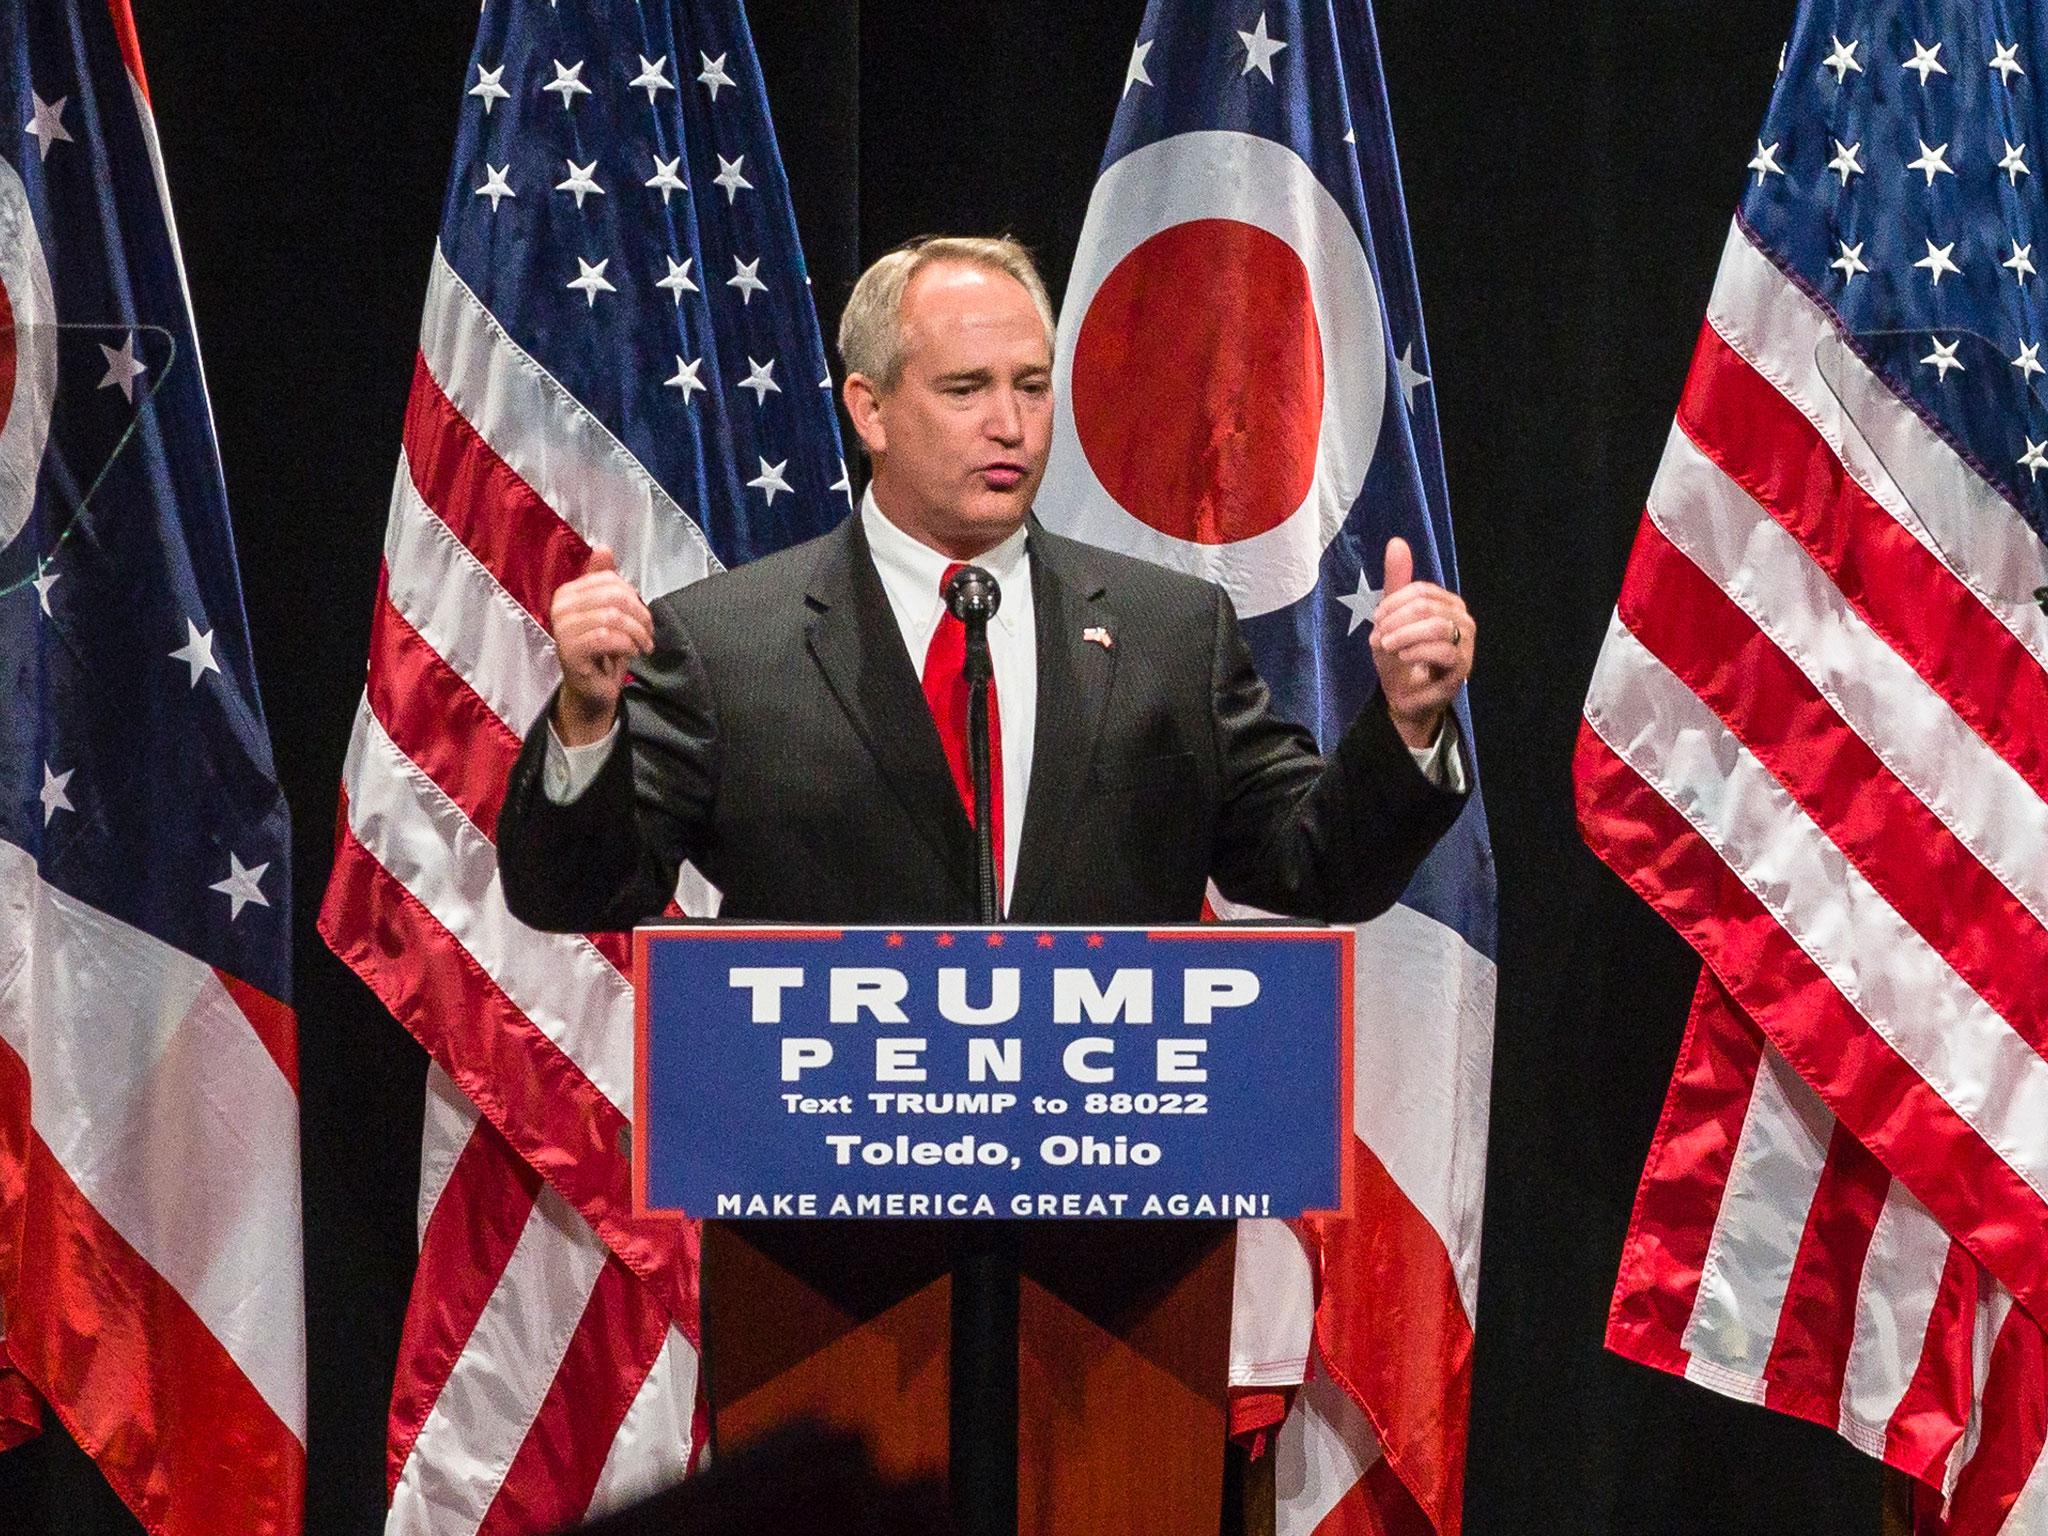 Ohio Senate President Keith Faber campaigned for Donald Trump during the election